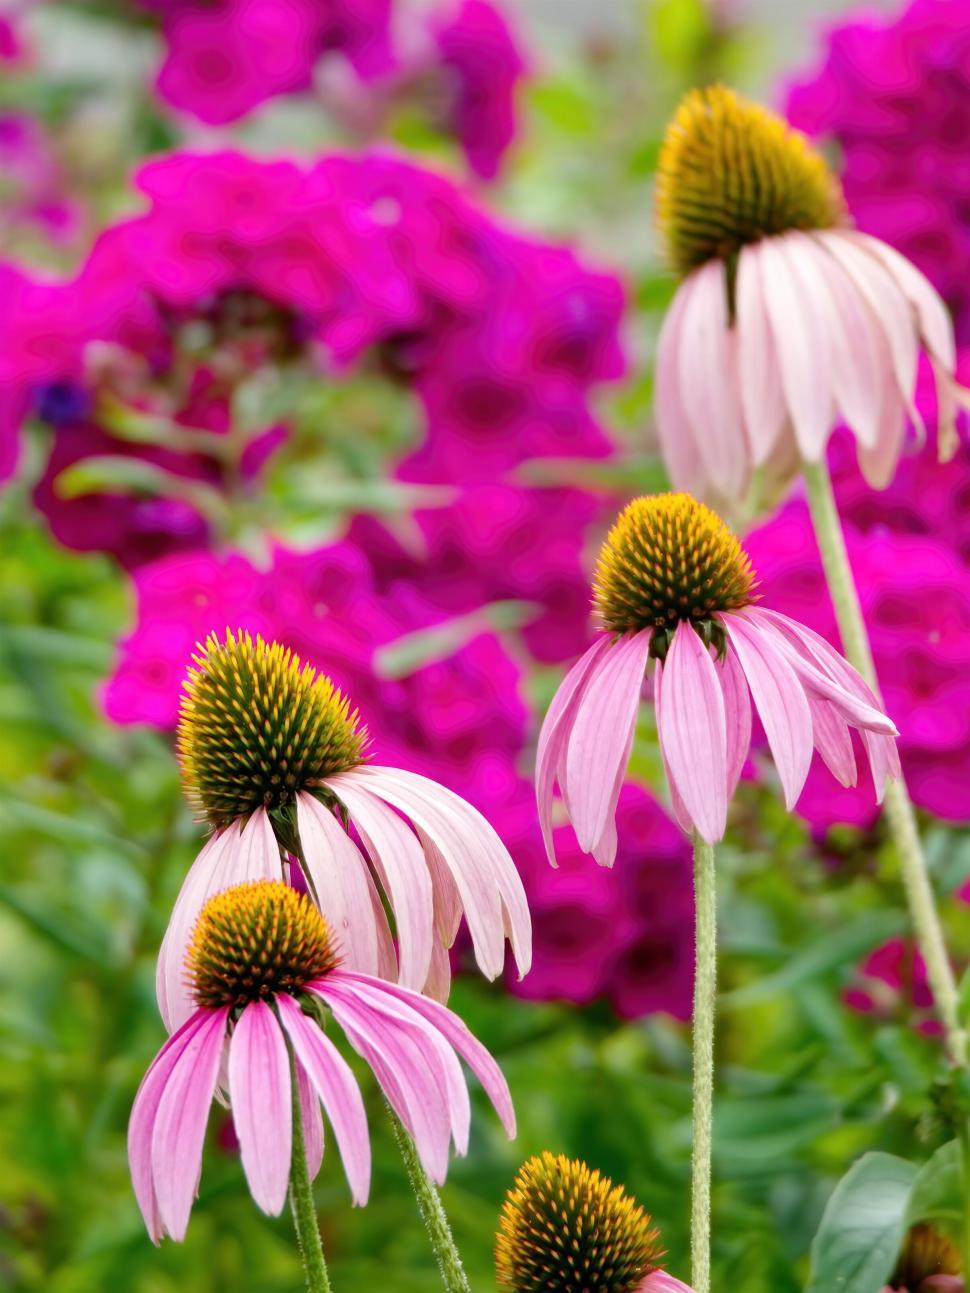 Free Image of Vibrant pink coneflowers in a garden 